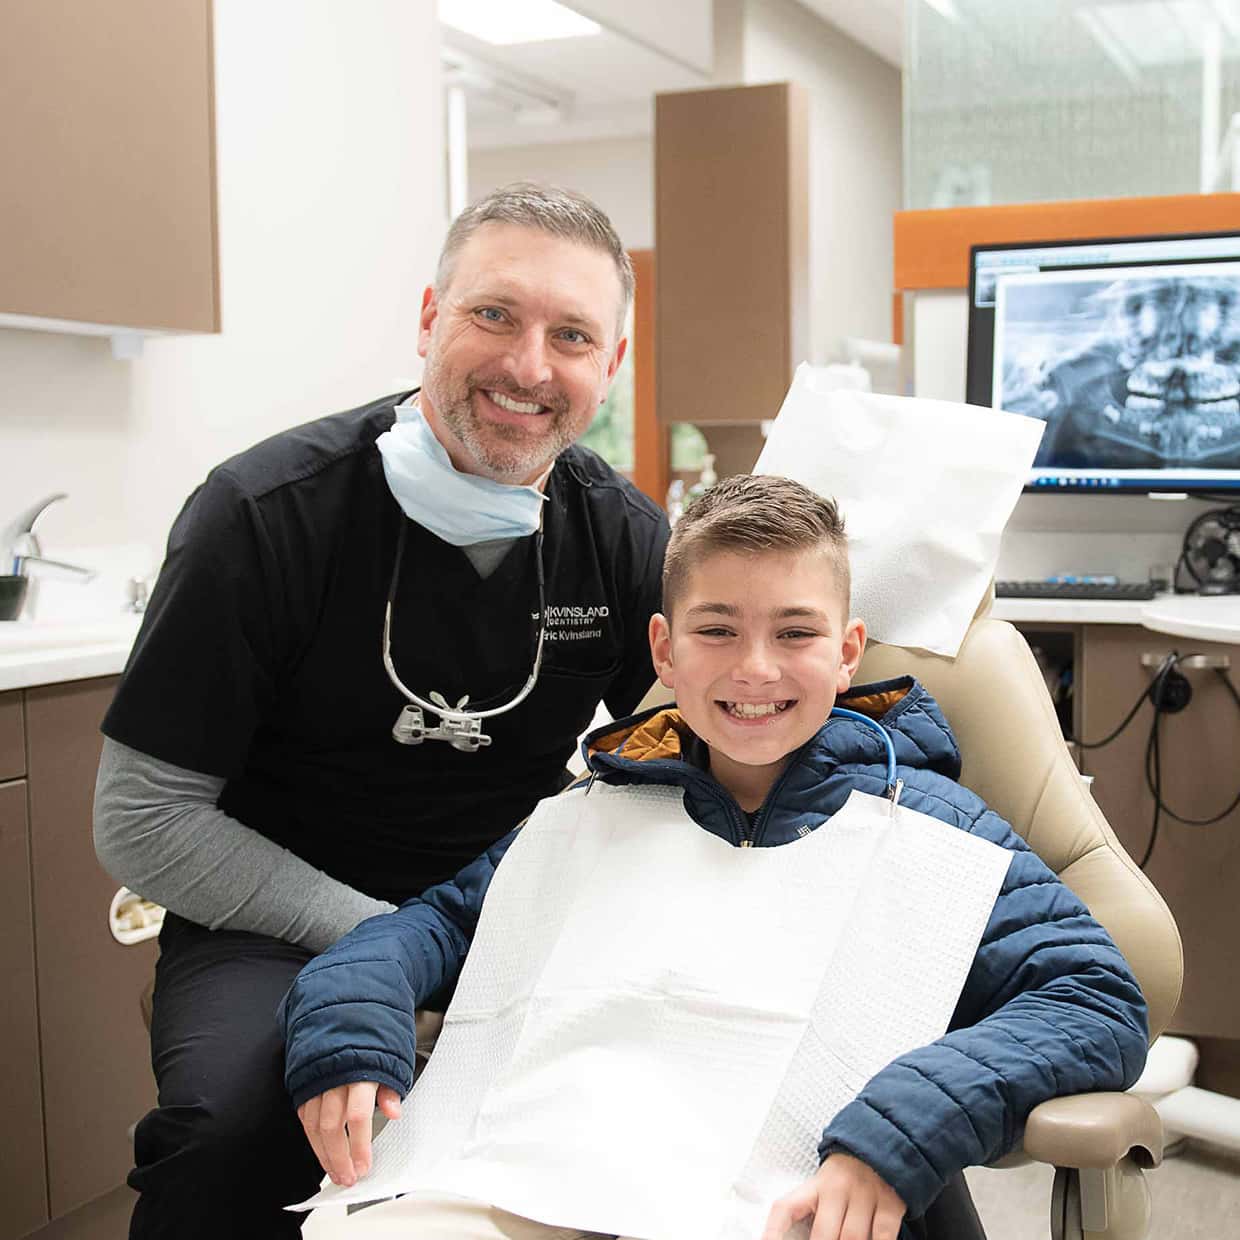 A happy child with the dentist after a visit. Fun dental for kids helps make the difference.